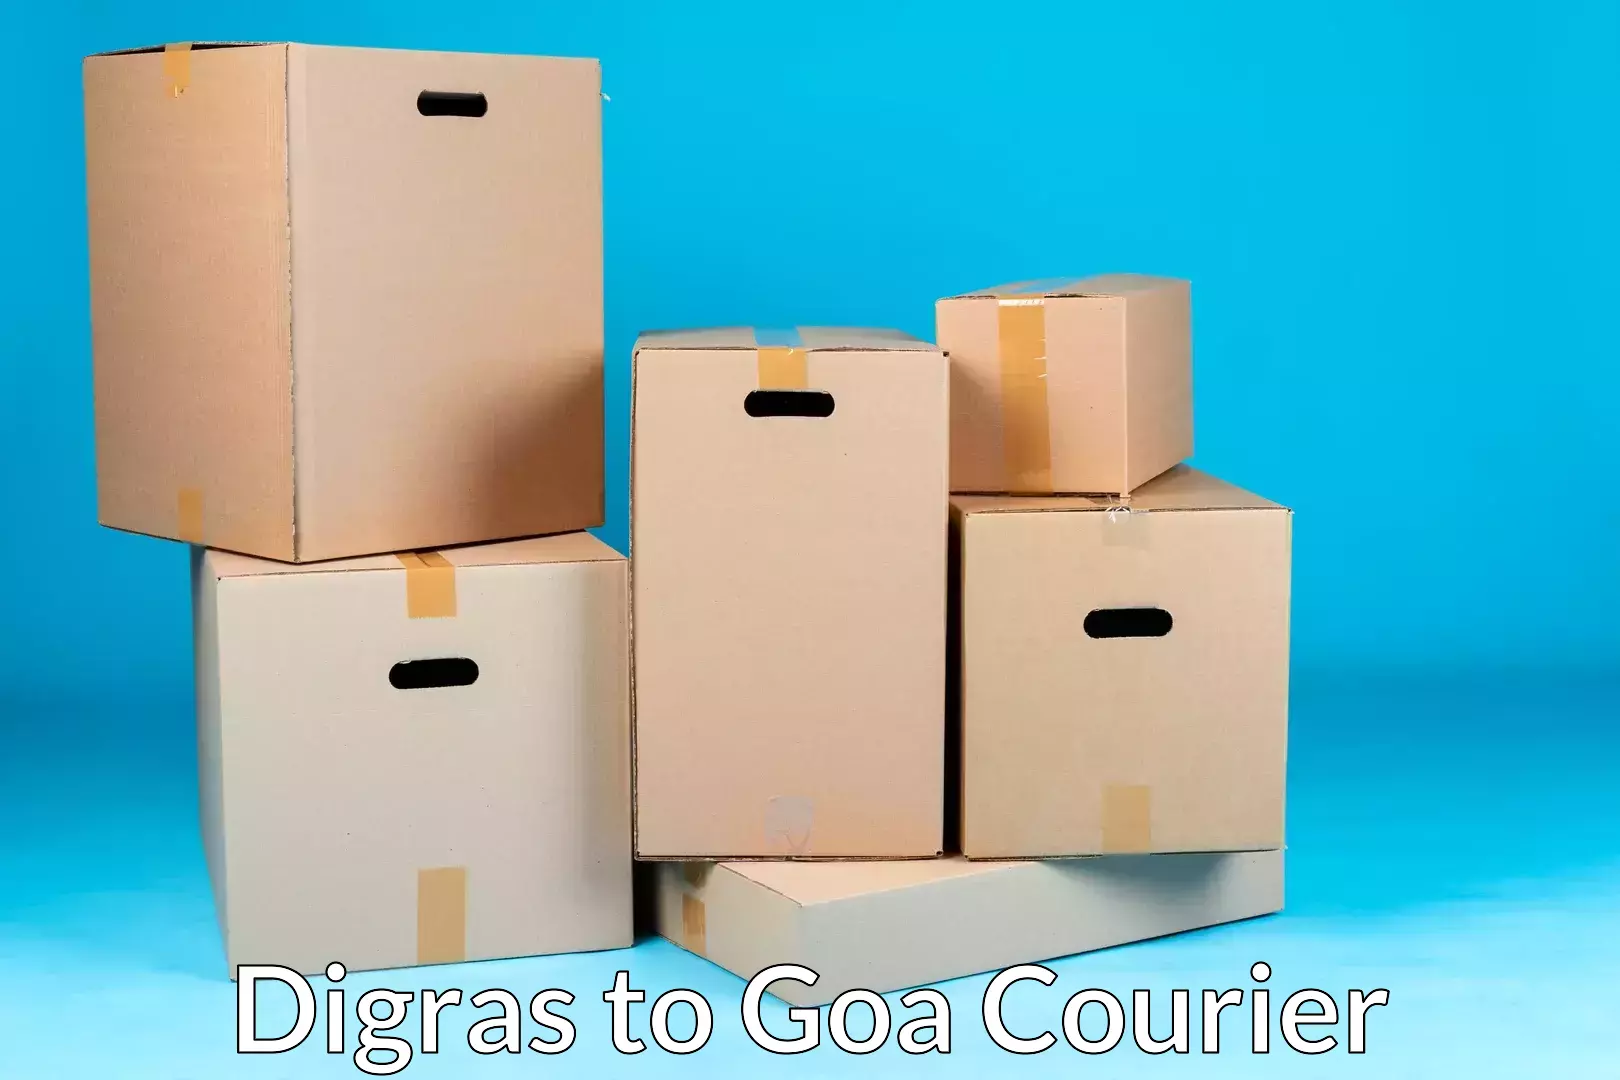 Furniture transport specialists Digras to Goa